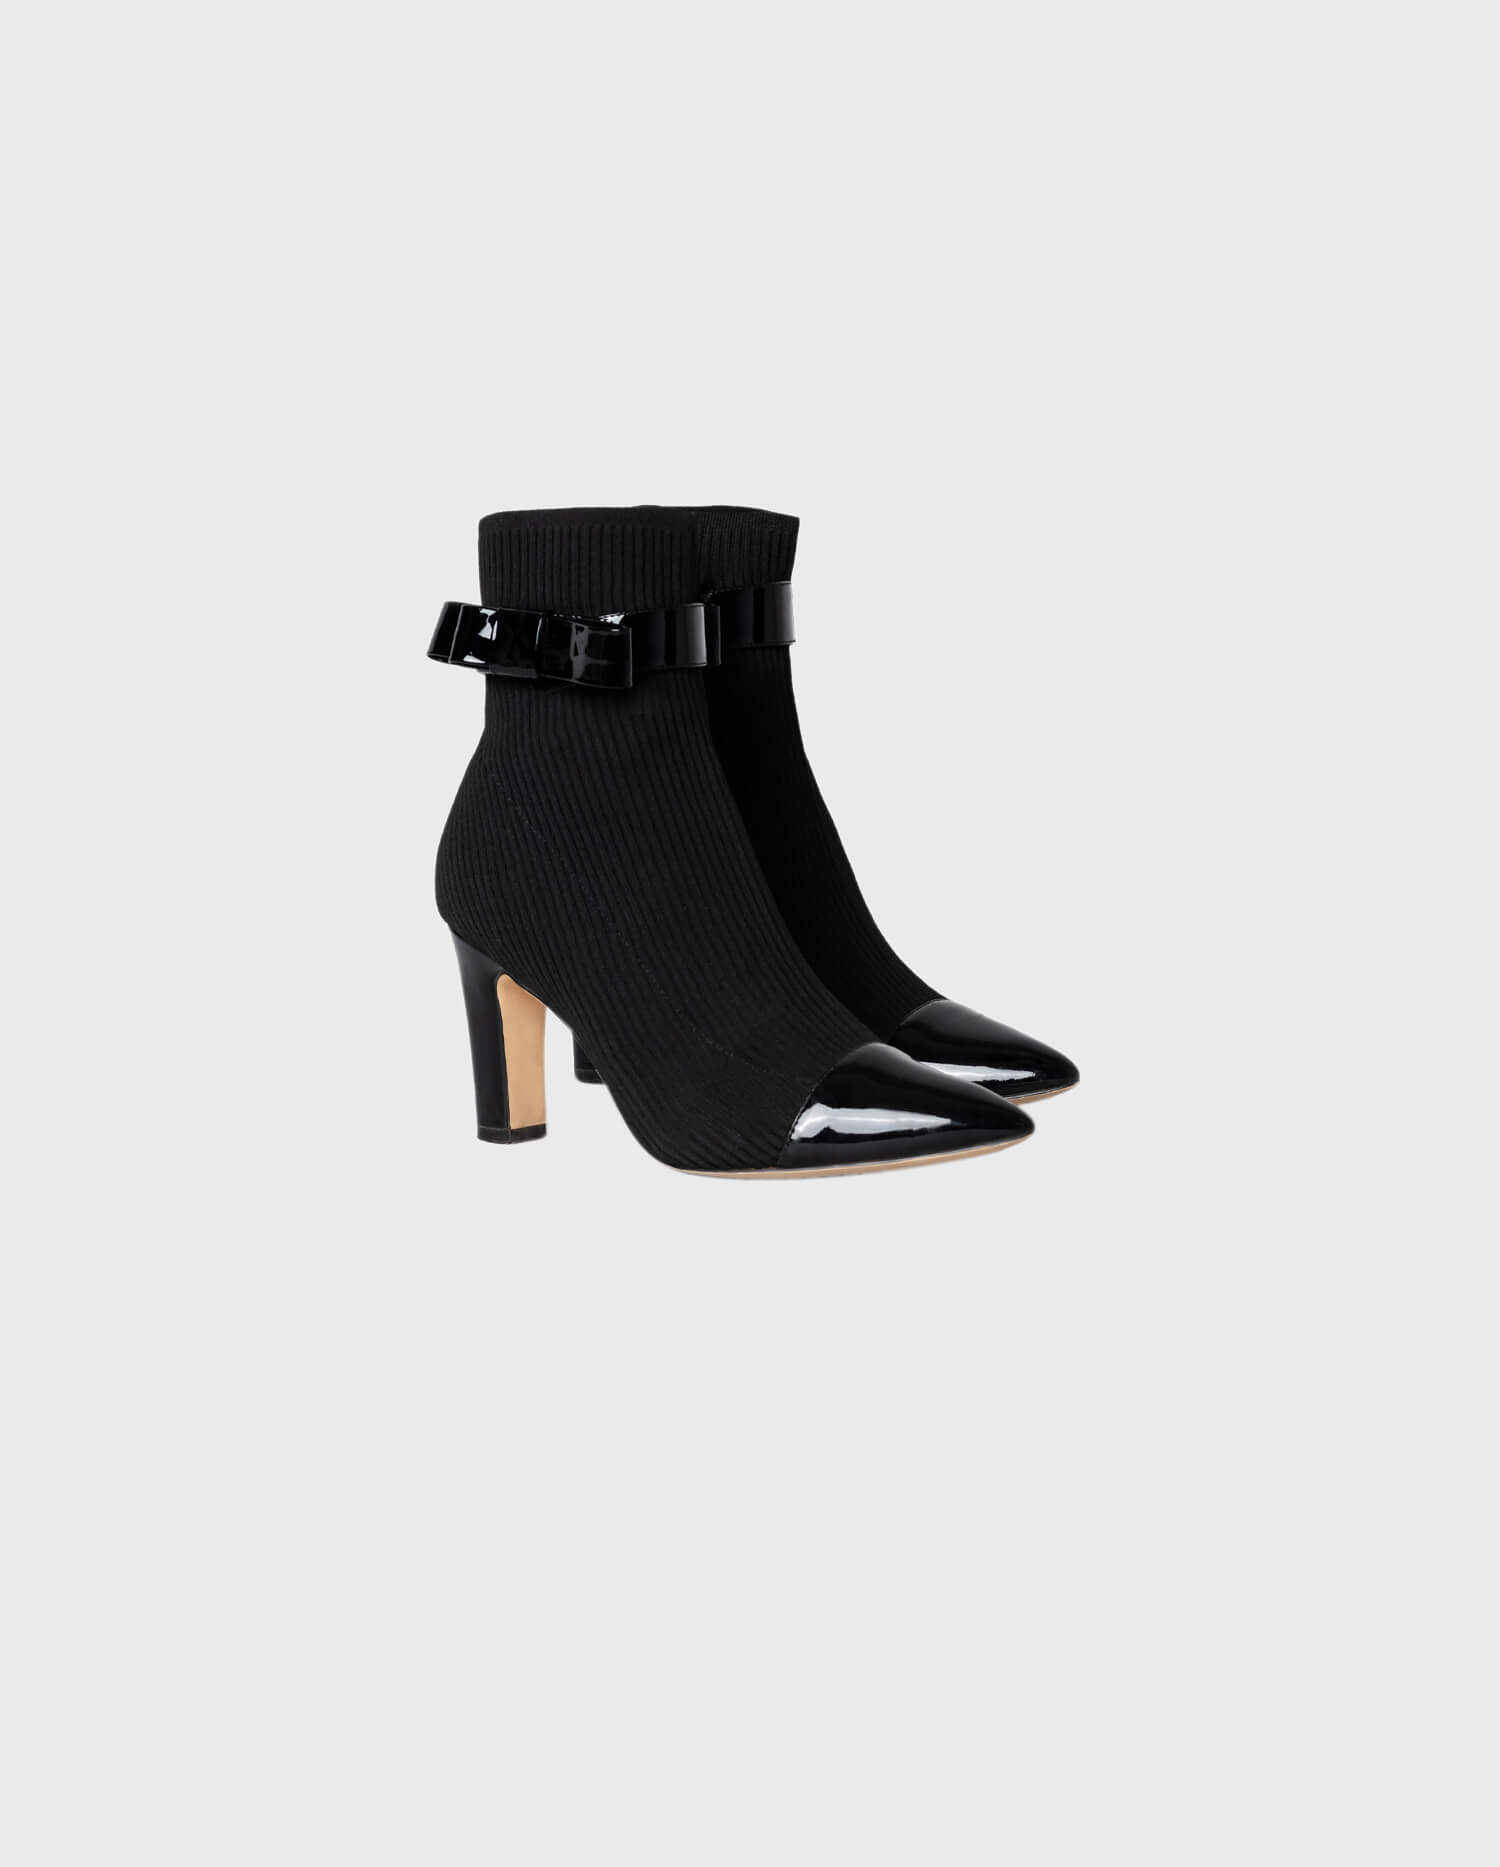 Shop the Black Judy Ribbed Sock Boots With Leather Details from designer Anne Fontaine